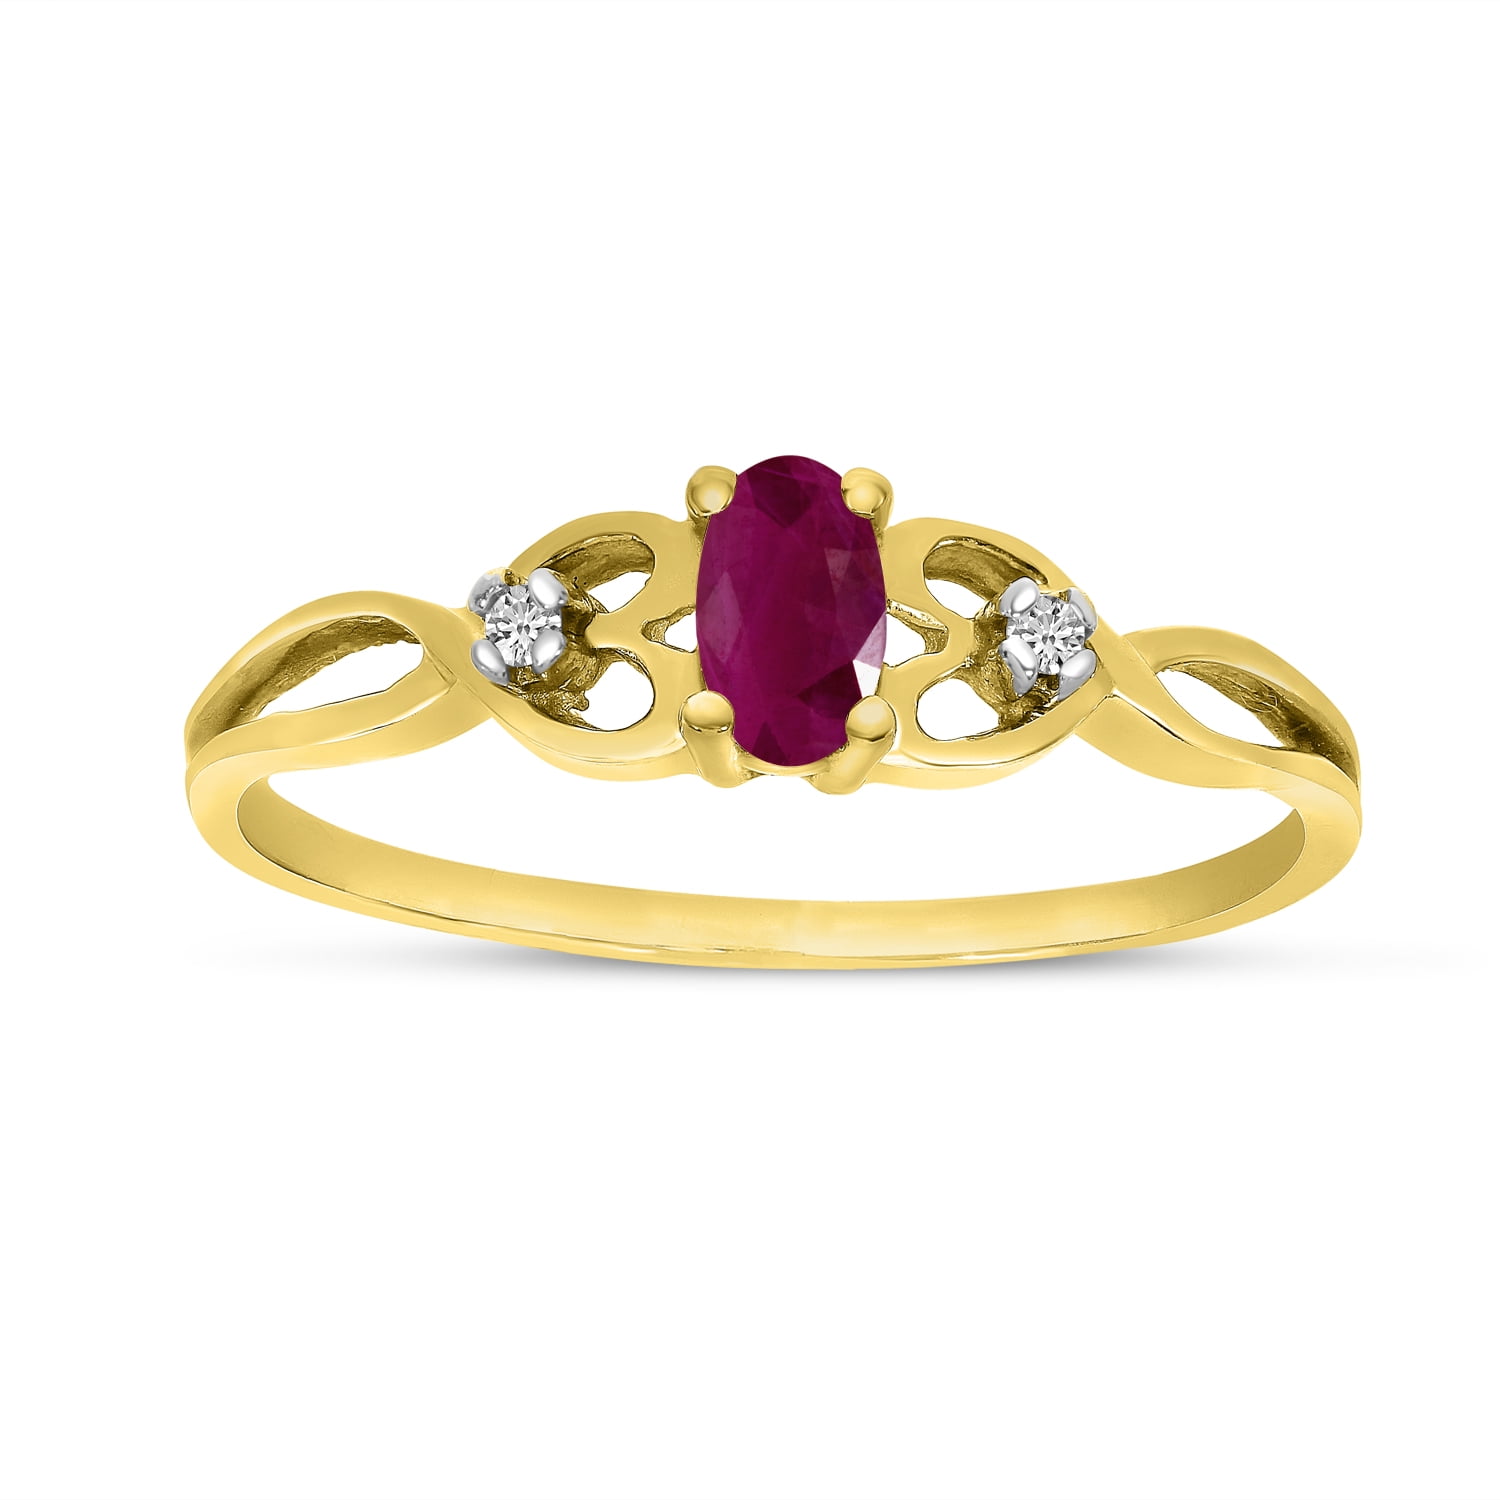 Details about   1.18 TCW Oval-Cut 18k Gold over Silver Genuine Ruby and Topaz Halo Ring